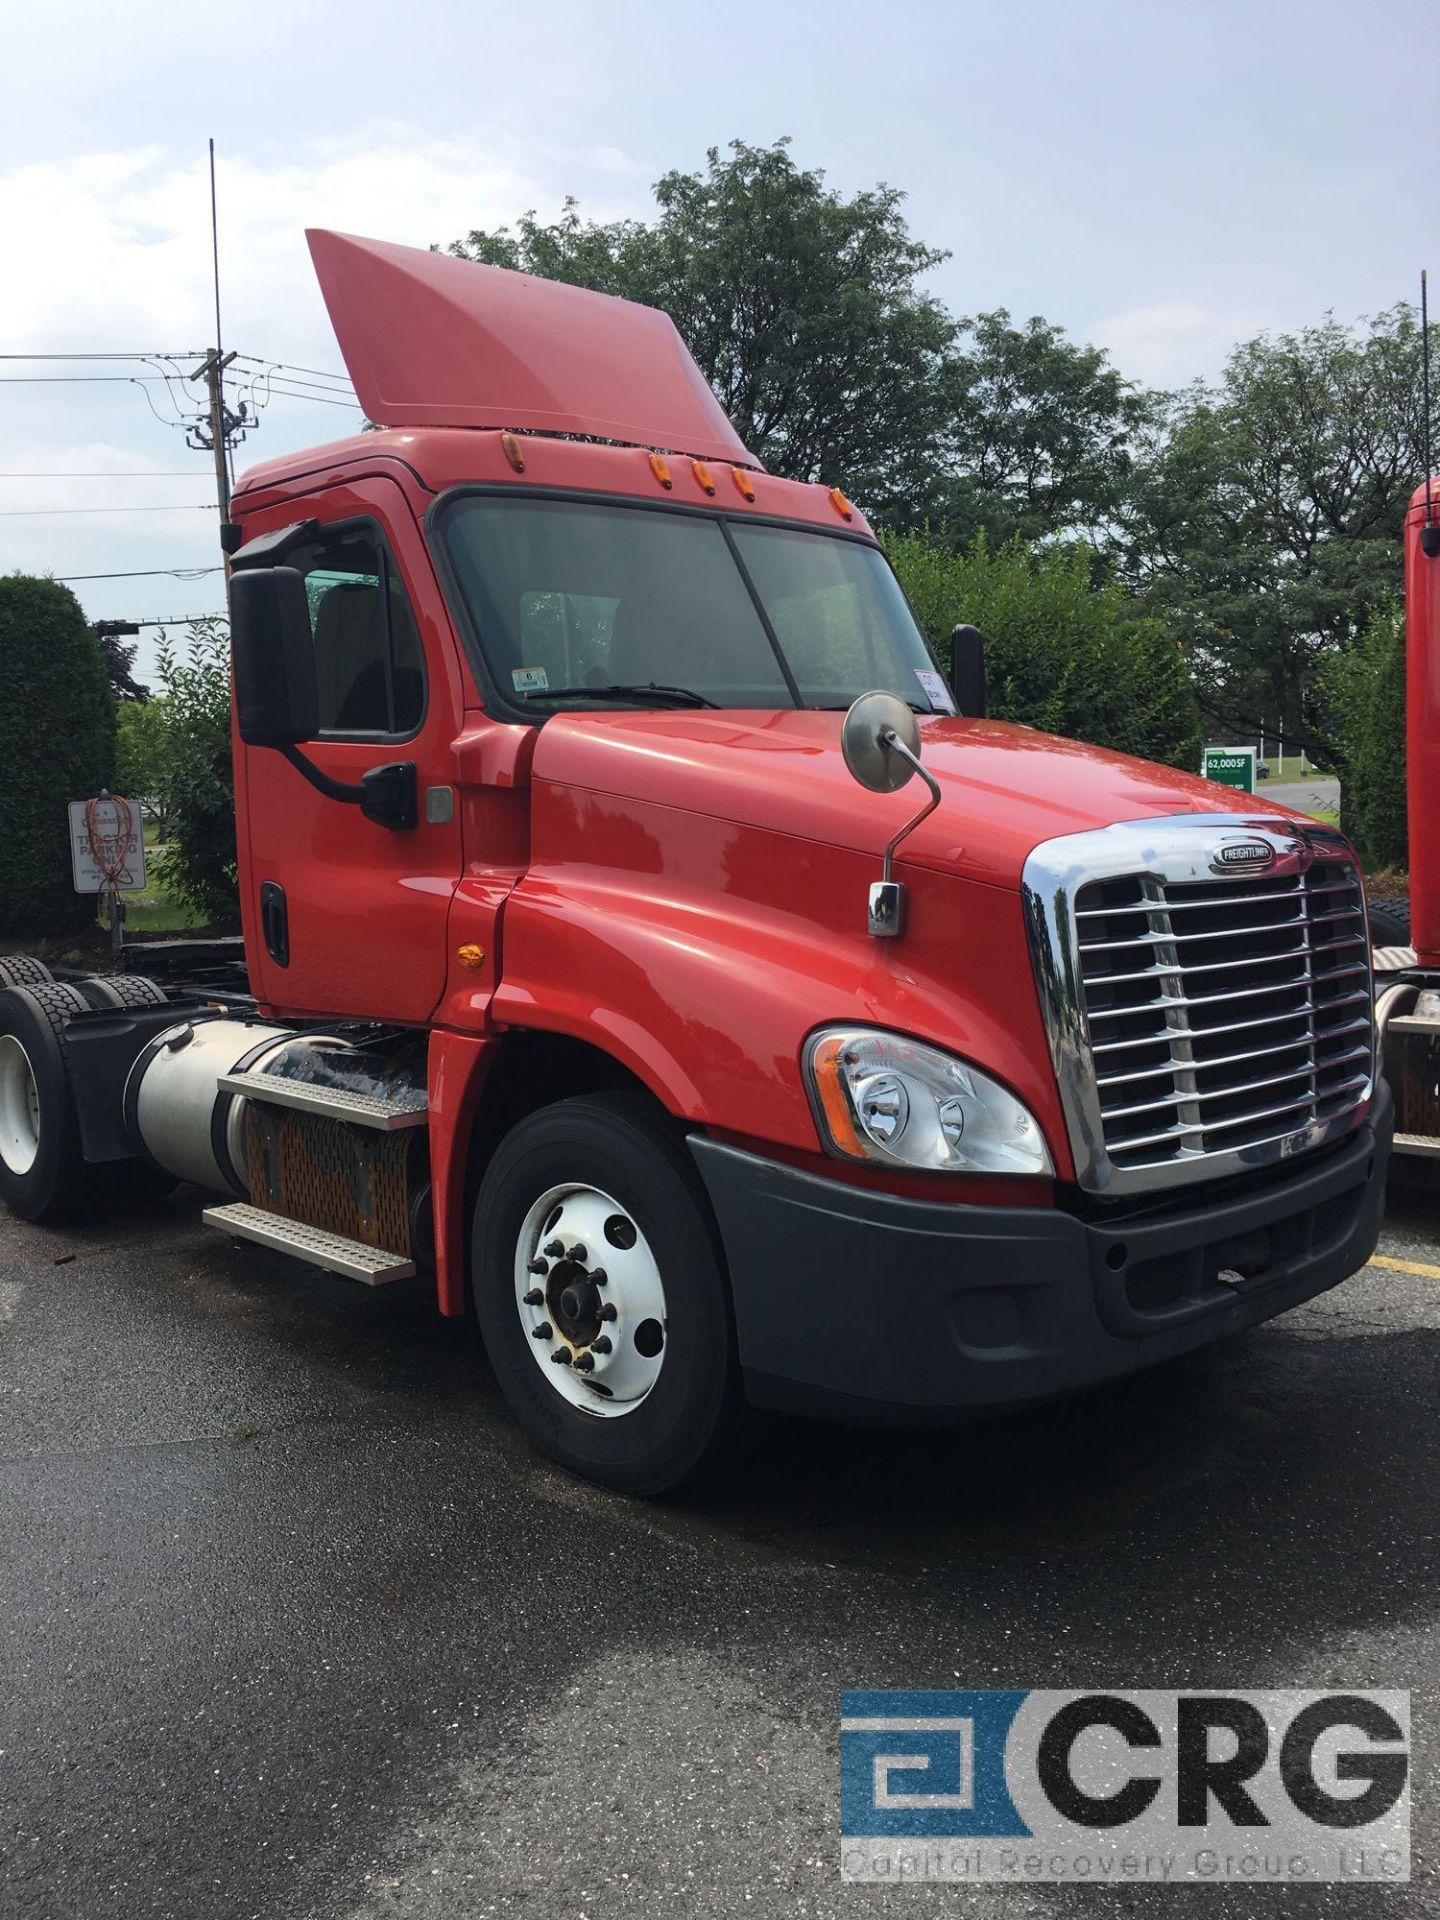 2015 Freightliner Cascadia 125 Tandem Axle Day Cab Tractor, 3AKJGEBG8FDGR2138, 178" wheelbase, - Image 3 of 8